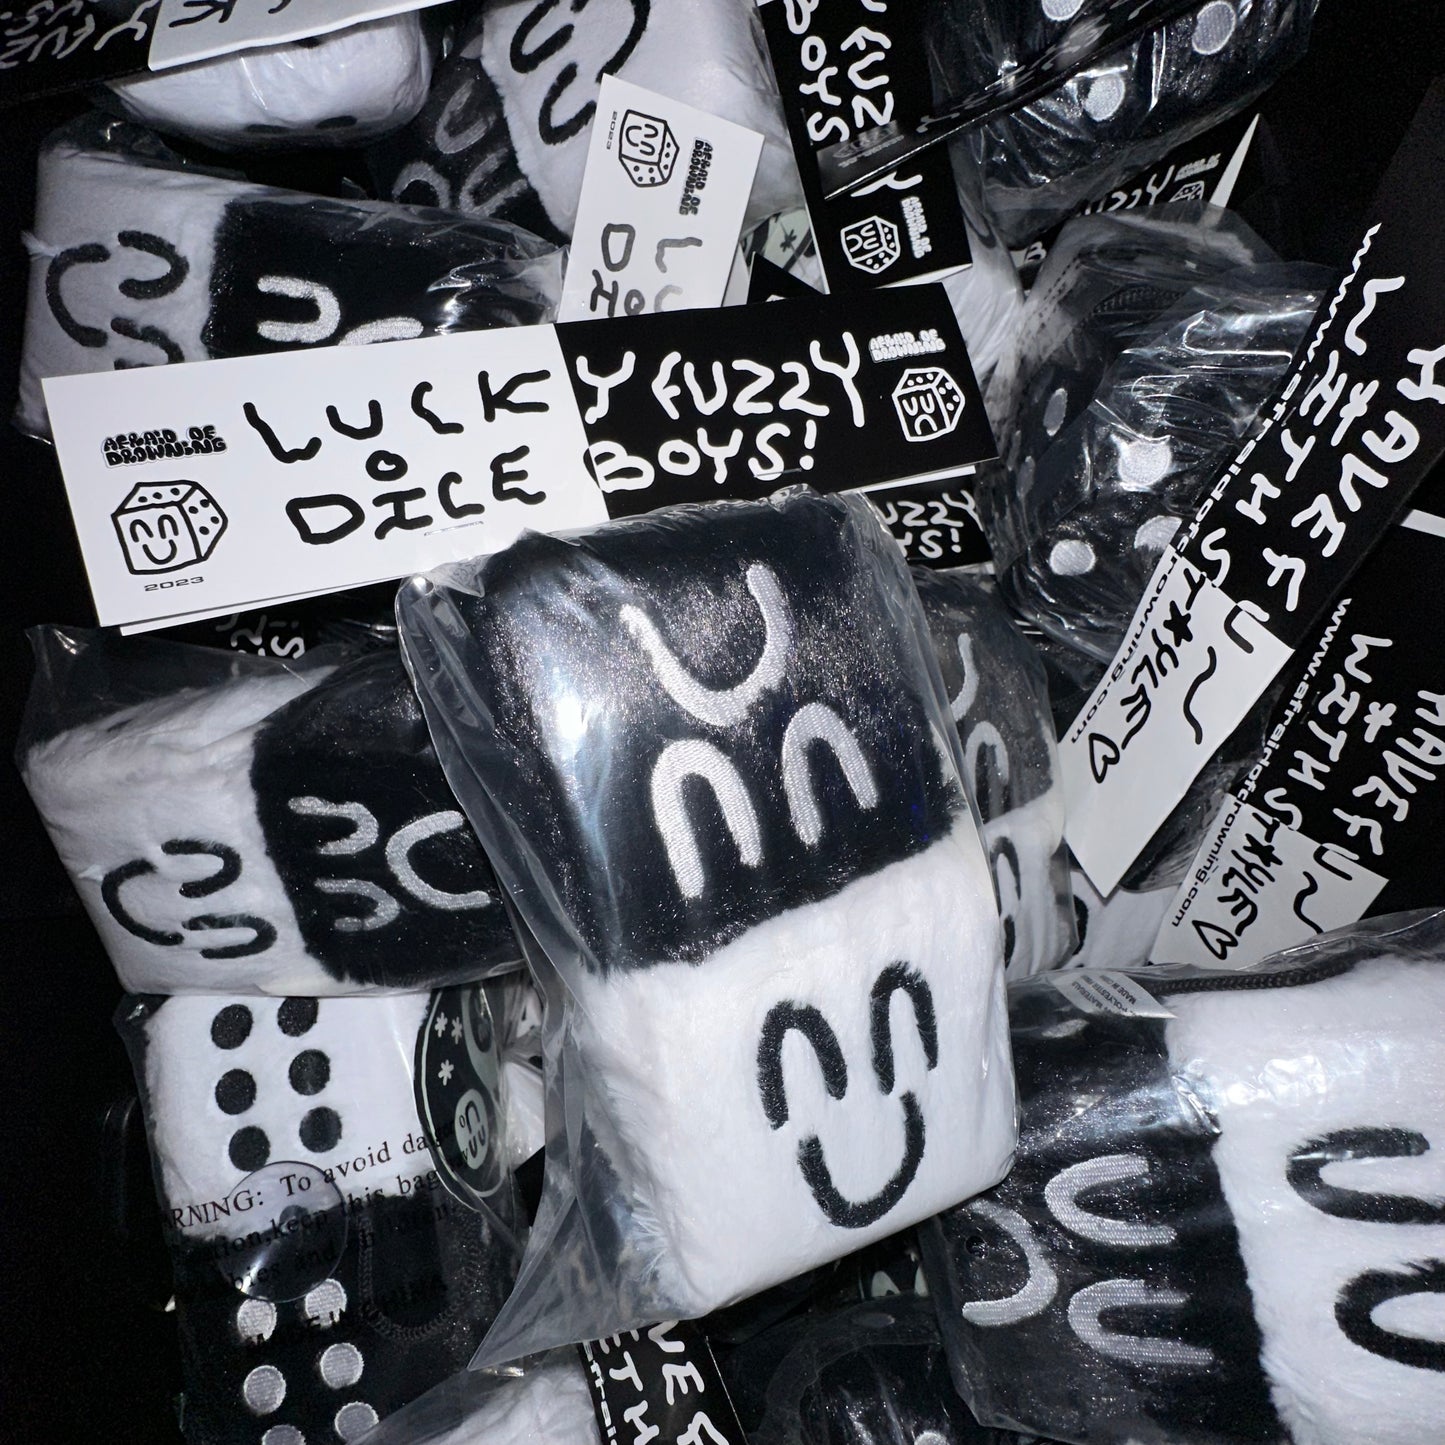 FUZZY DICE BOYS - BLACK / WHITE YIN & YANG (SPECIAL EDITION)